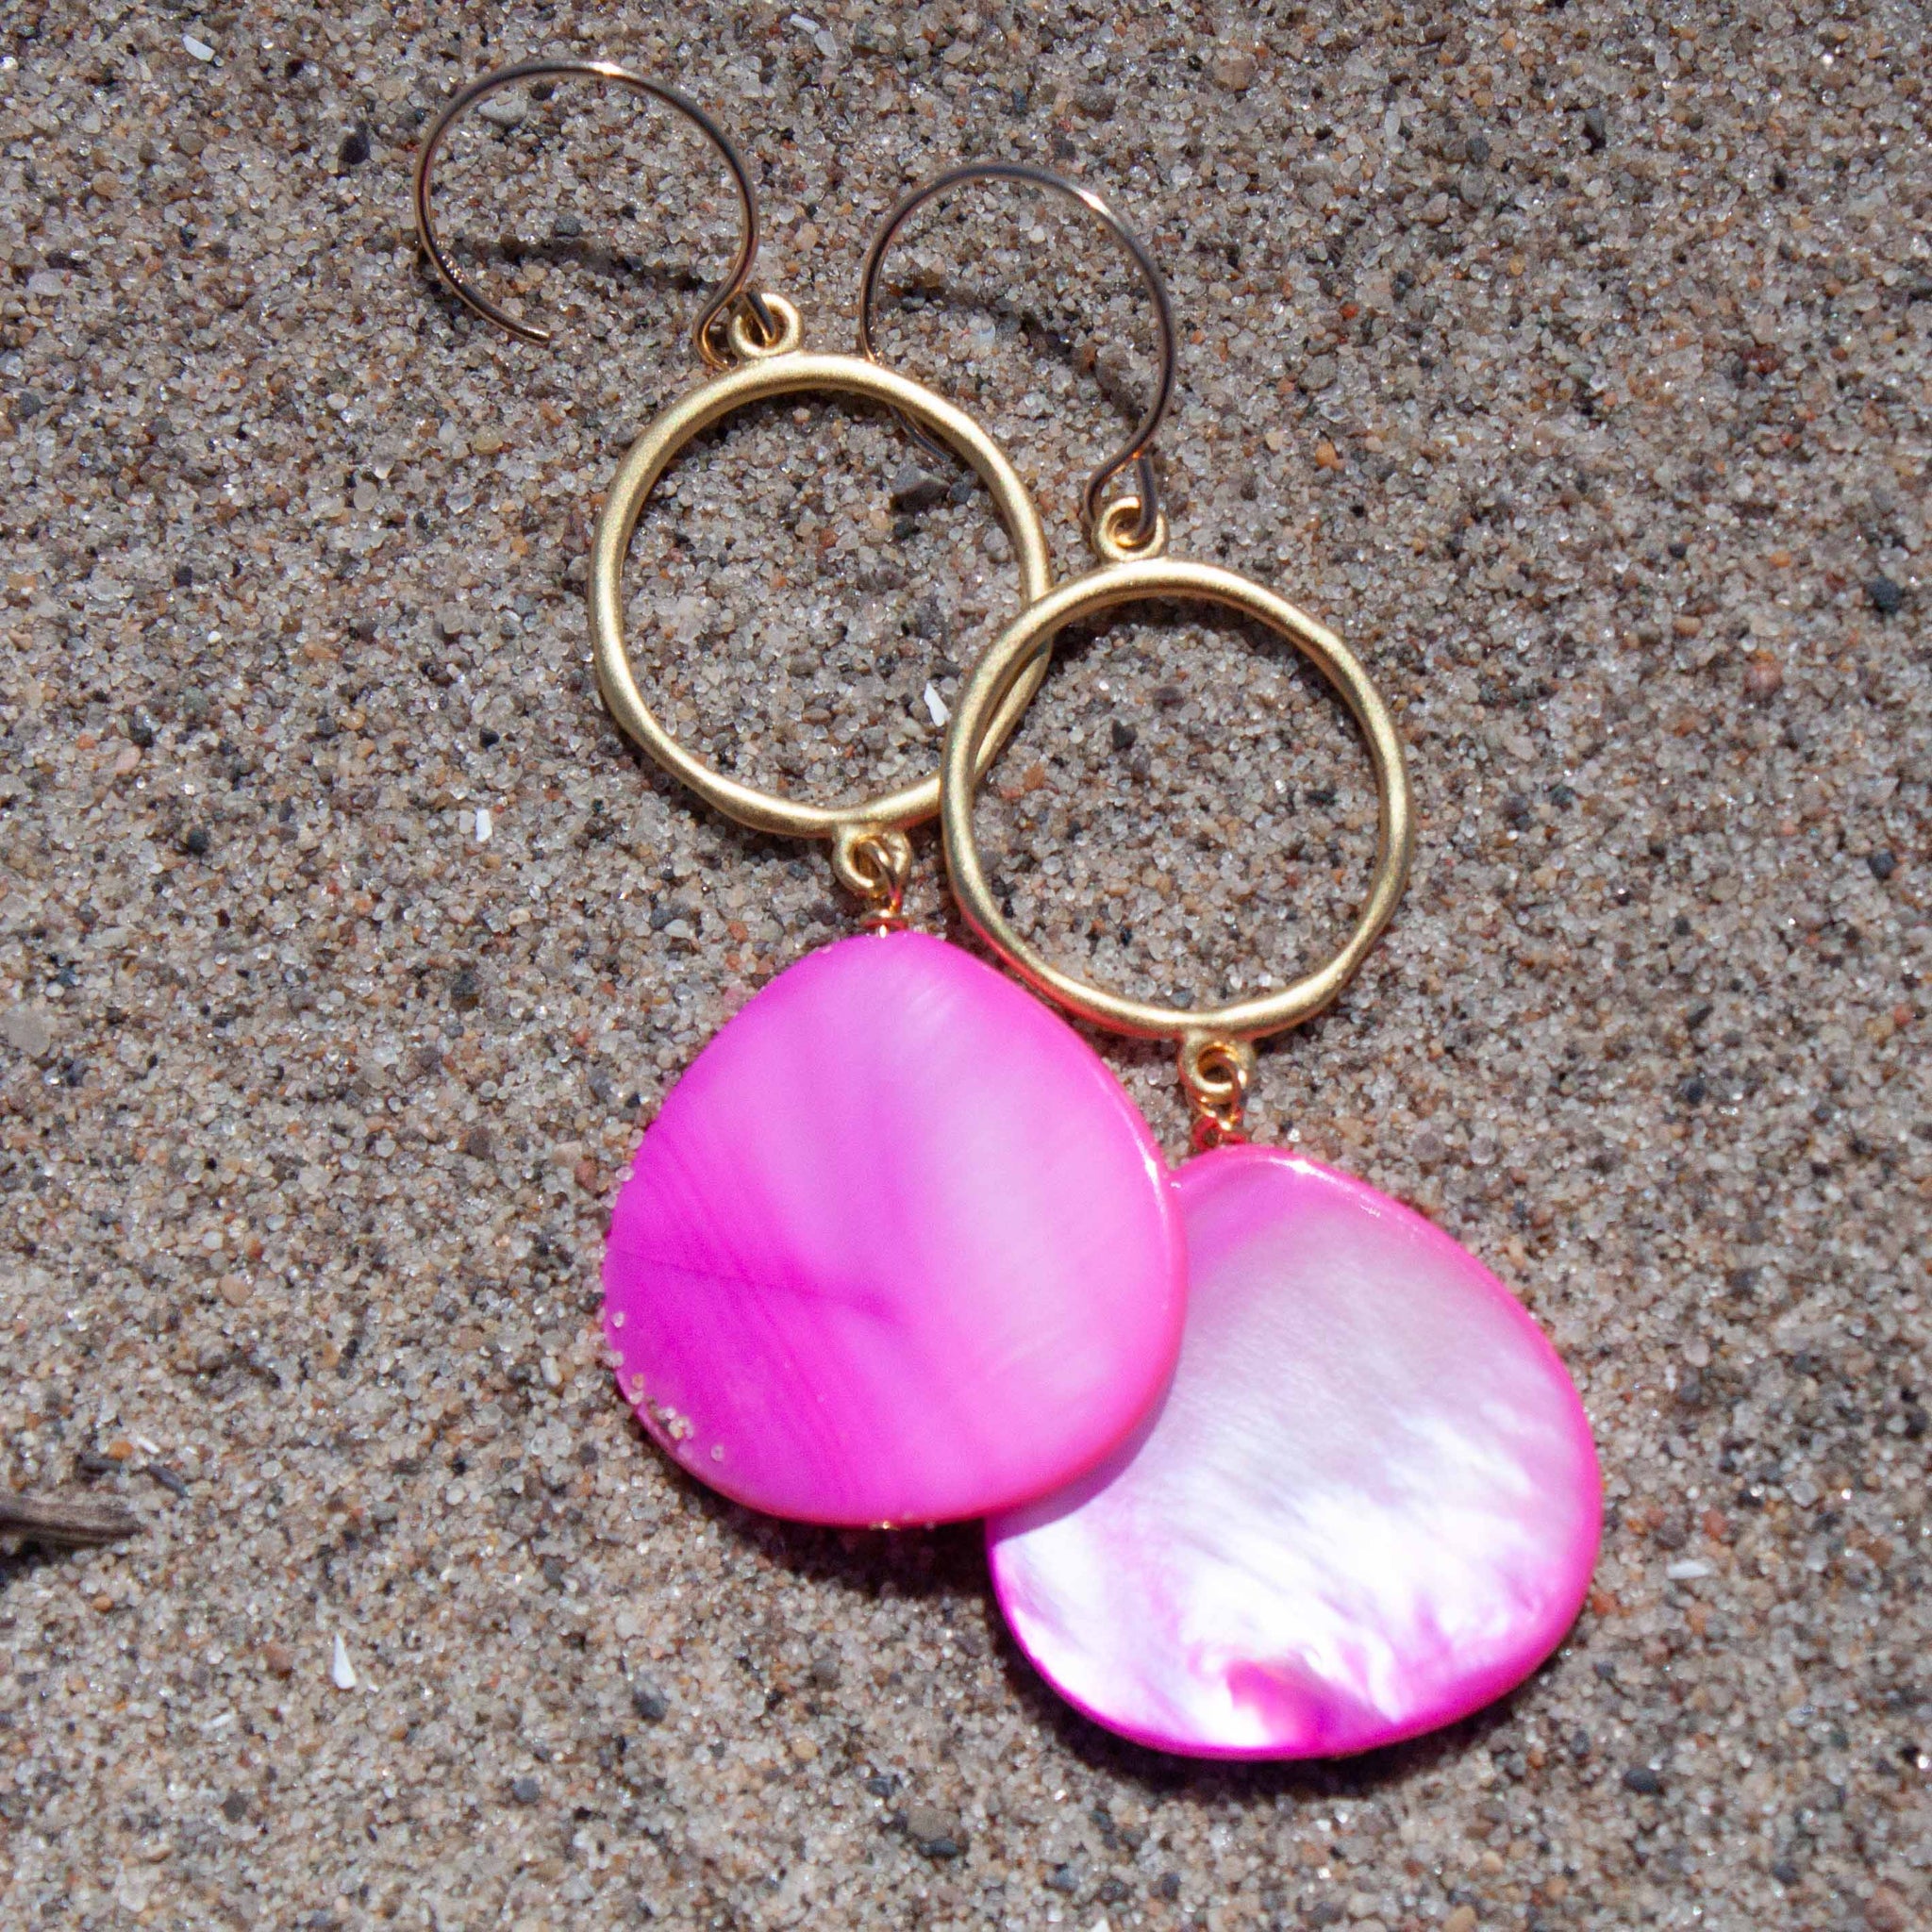 If we can't go to the beach (yet!), let's at least feel like we're there! Put on these luscious shell earrings, crush yourself some mint and enjoy a mojito! 2" fuchsia shell earrings with gold vermeil circle charm and gold filled earrings hooks. Made in Toronto by kp jewelry co.